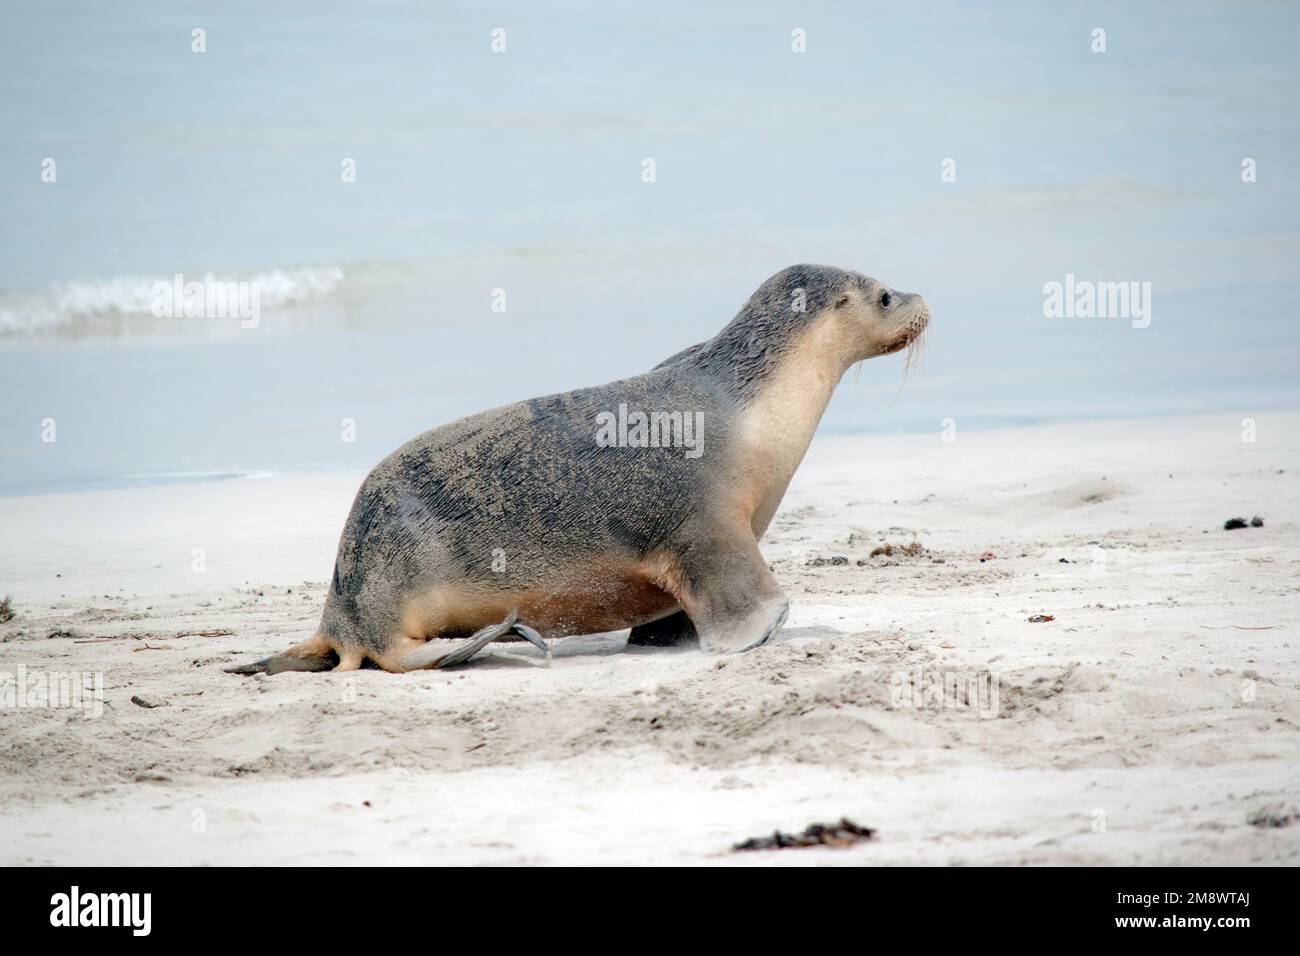 the sea lion pup is walking along the beach looking for his mother to return from fishing Stock Photo